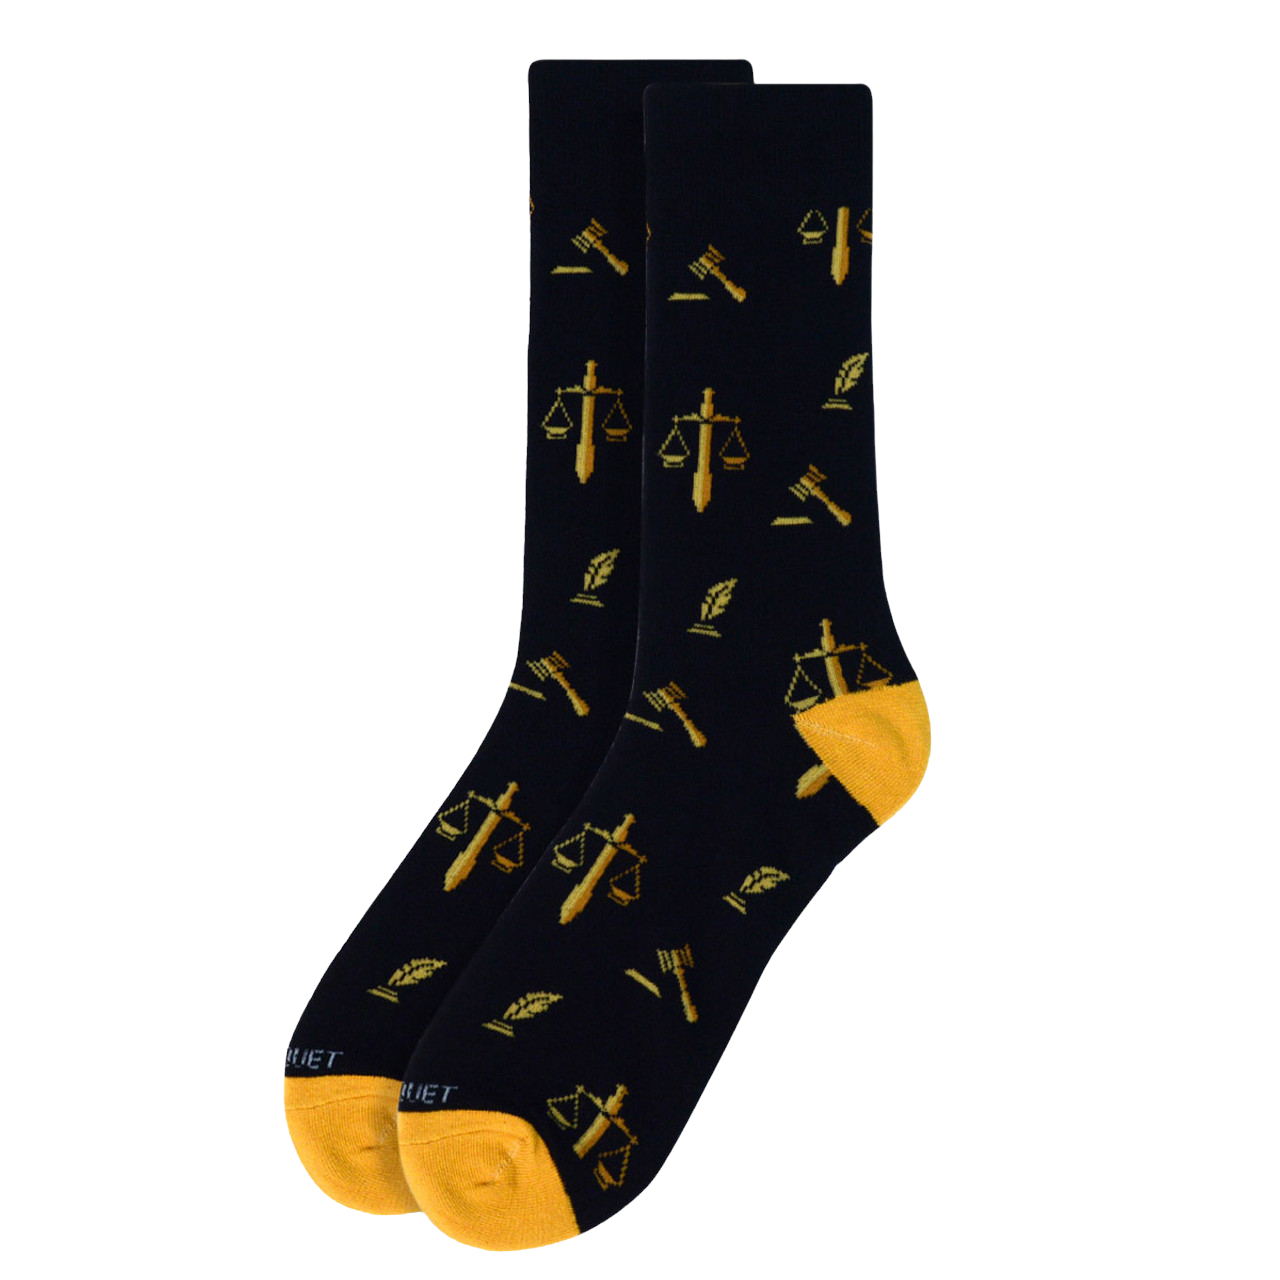 Pair of black lawyer-themed socks featuring gold scales of justice, quill, and gavel symbols, designed for legal professionals and bar exam candidates.